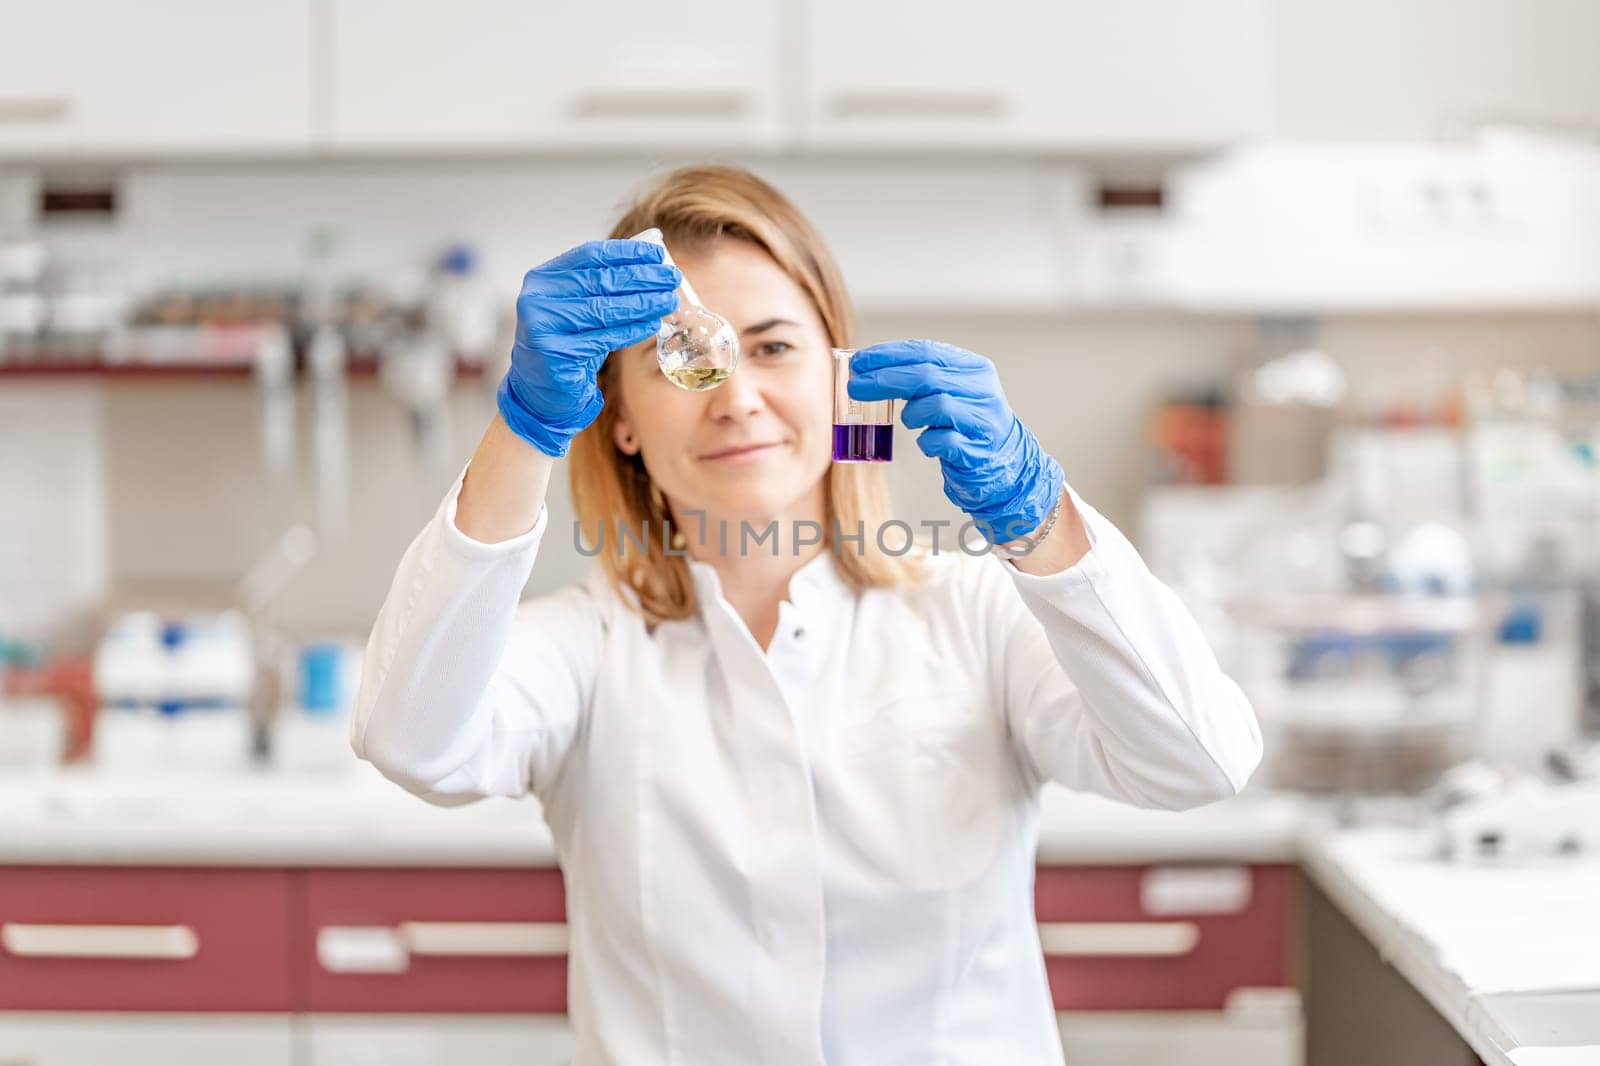 biochemical sample test in the laboratory by Edophoto